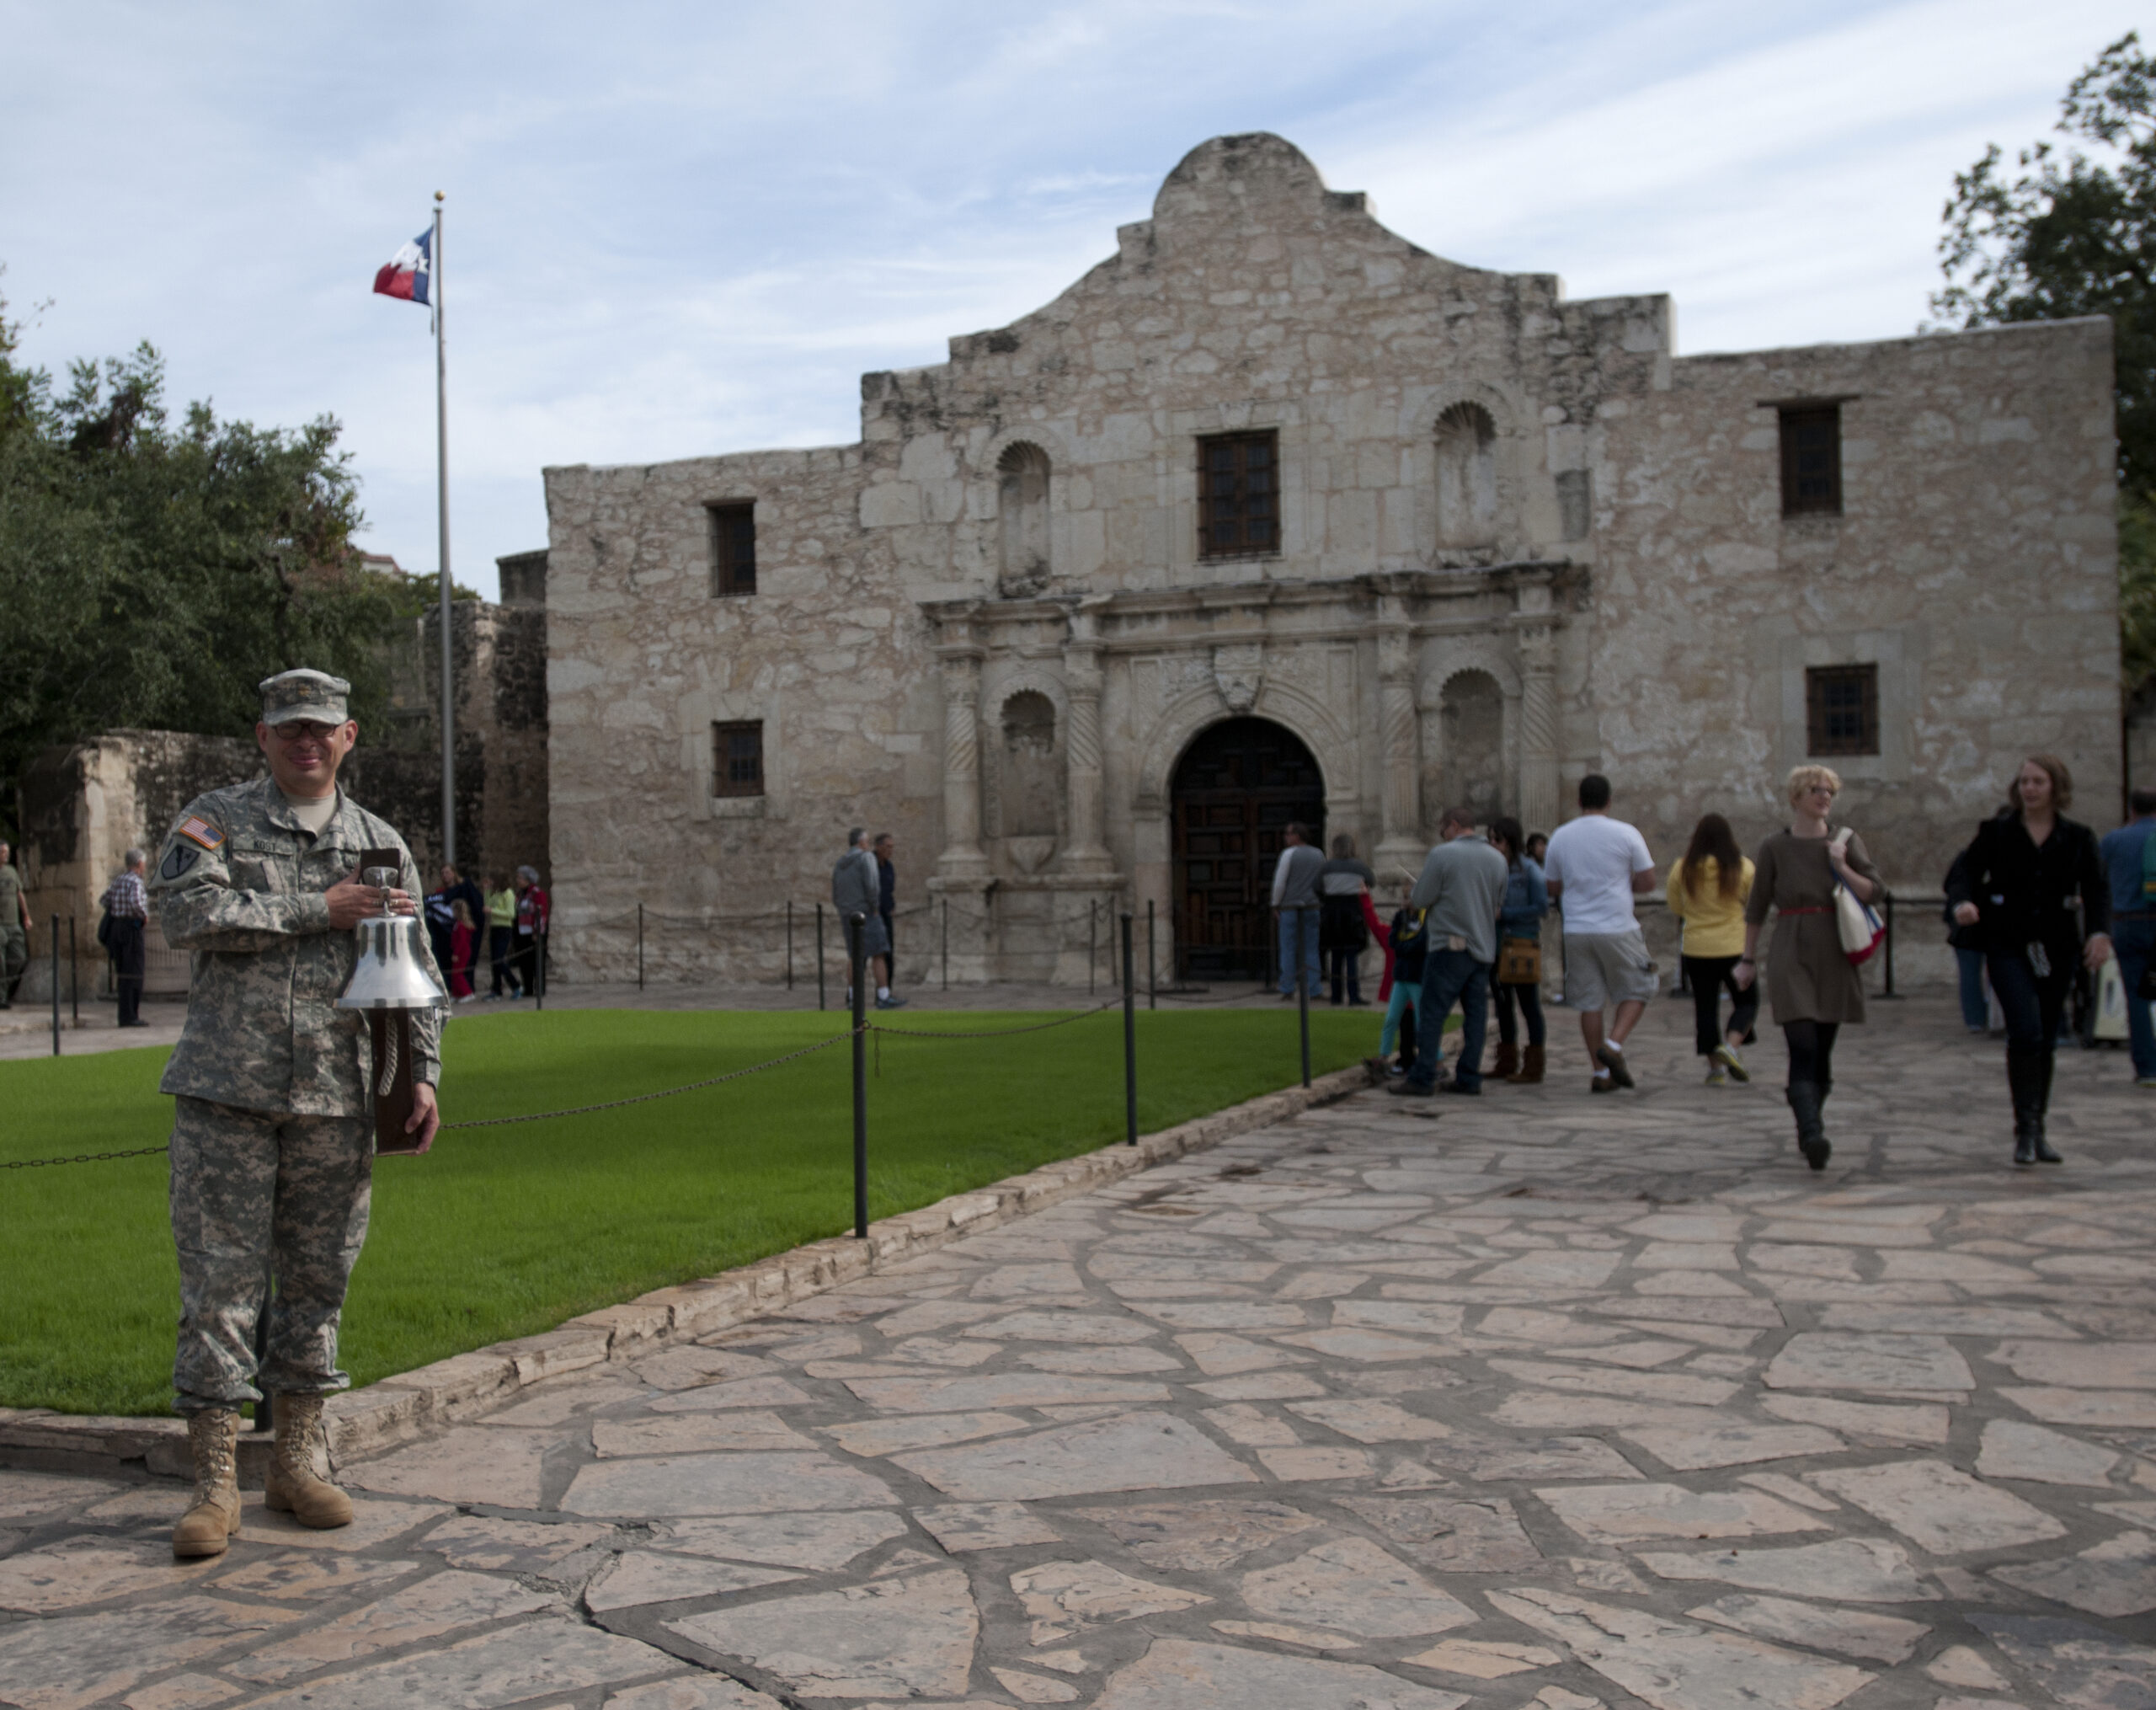 alamo places that made america great